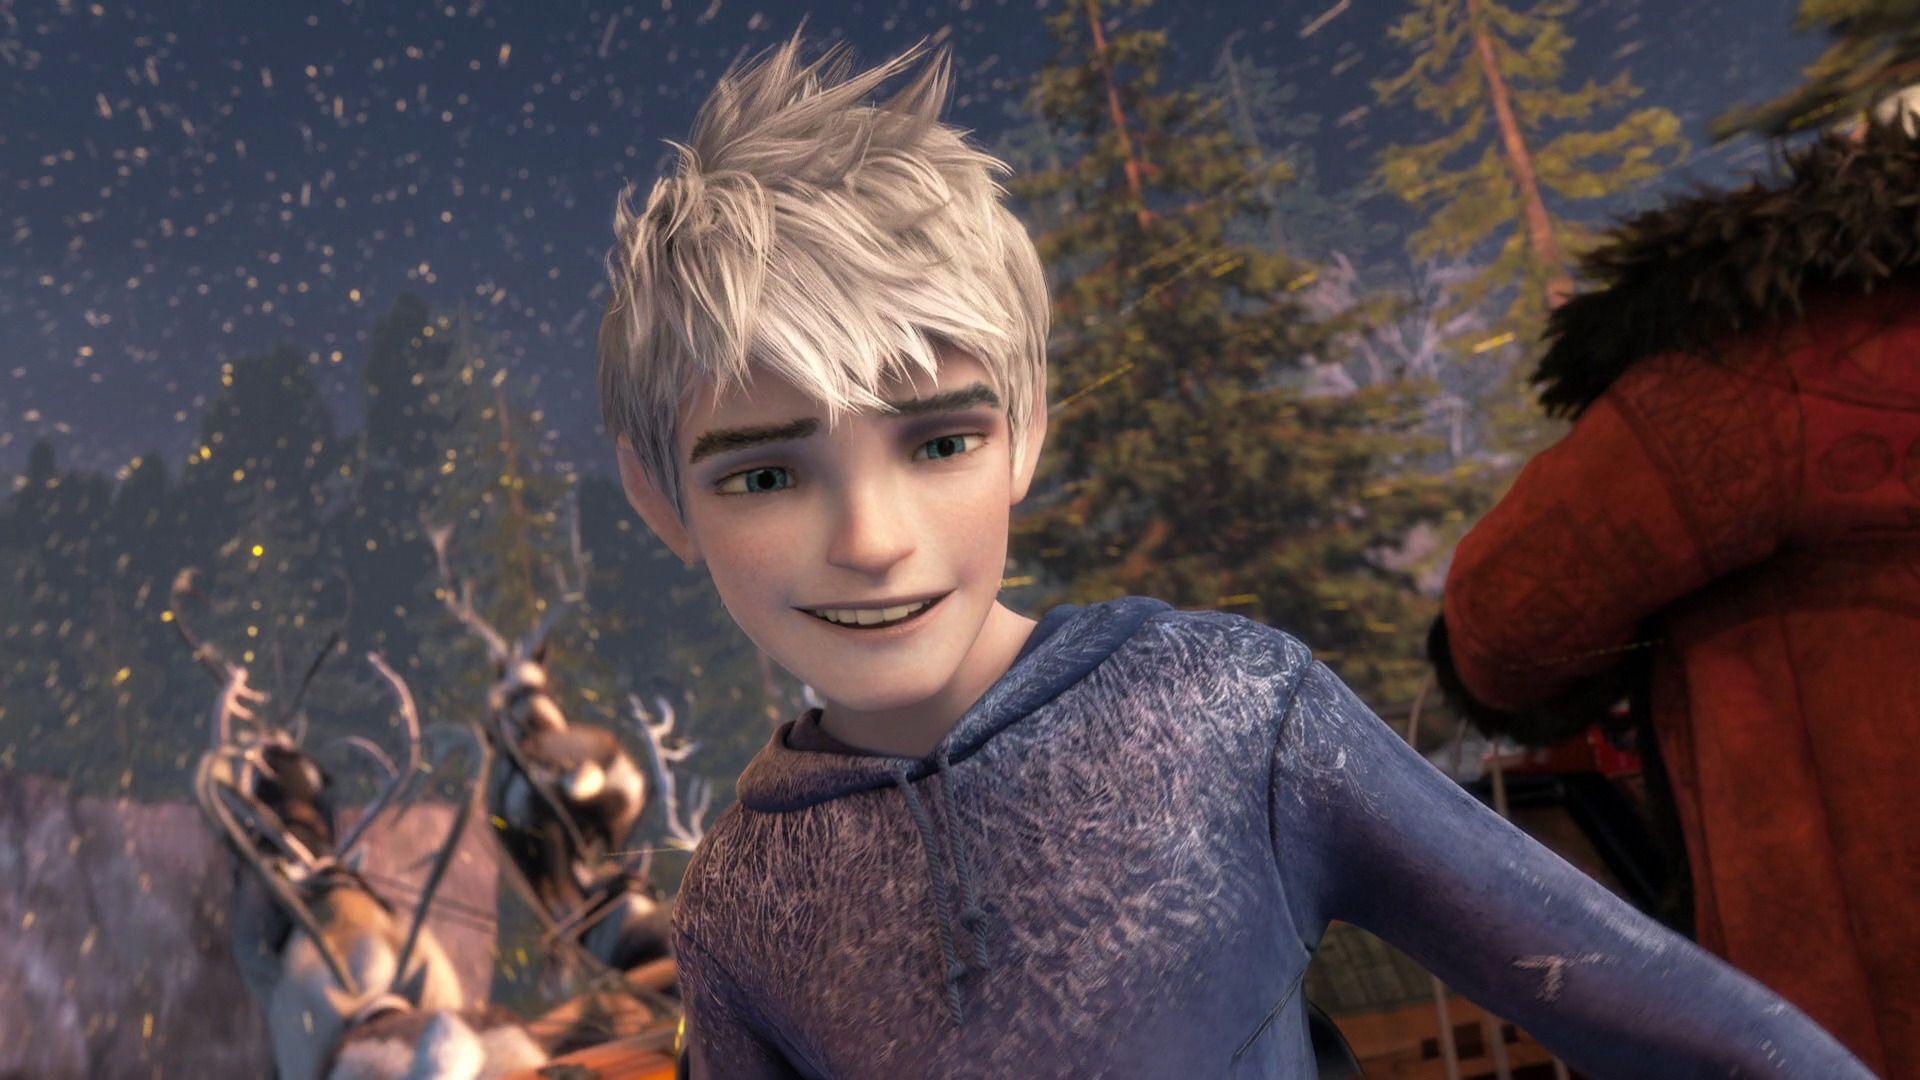 Cartoons Wallpaper: Rise Of The Guardians Jack Frost Wallpapers.